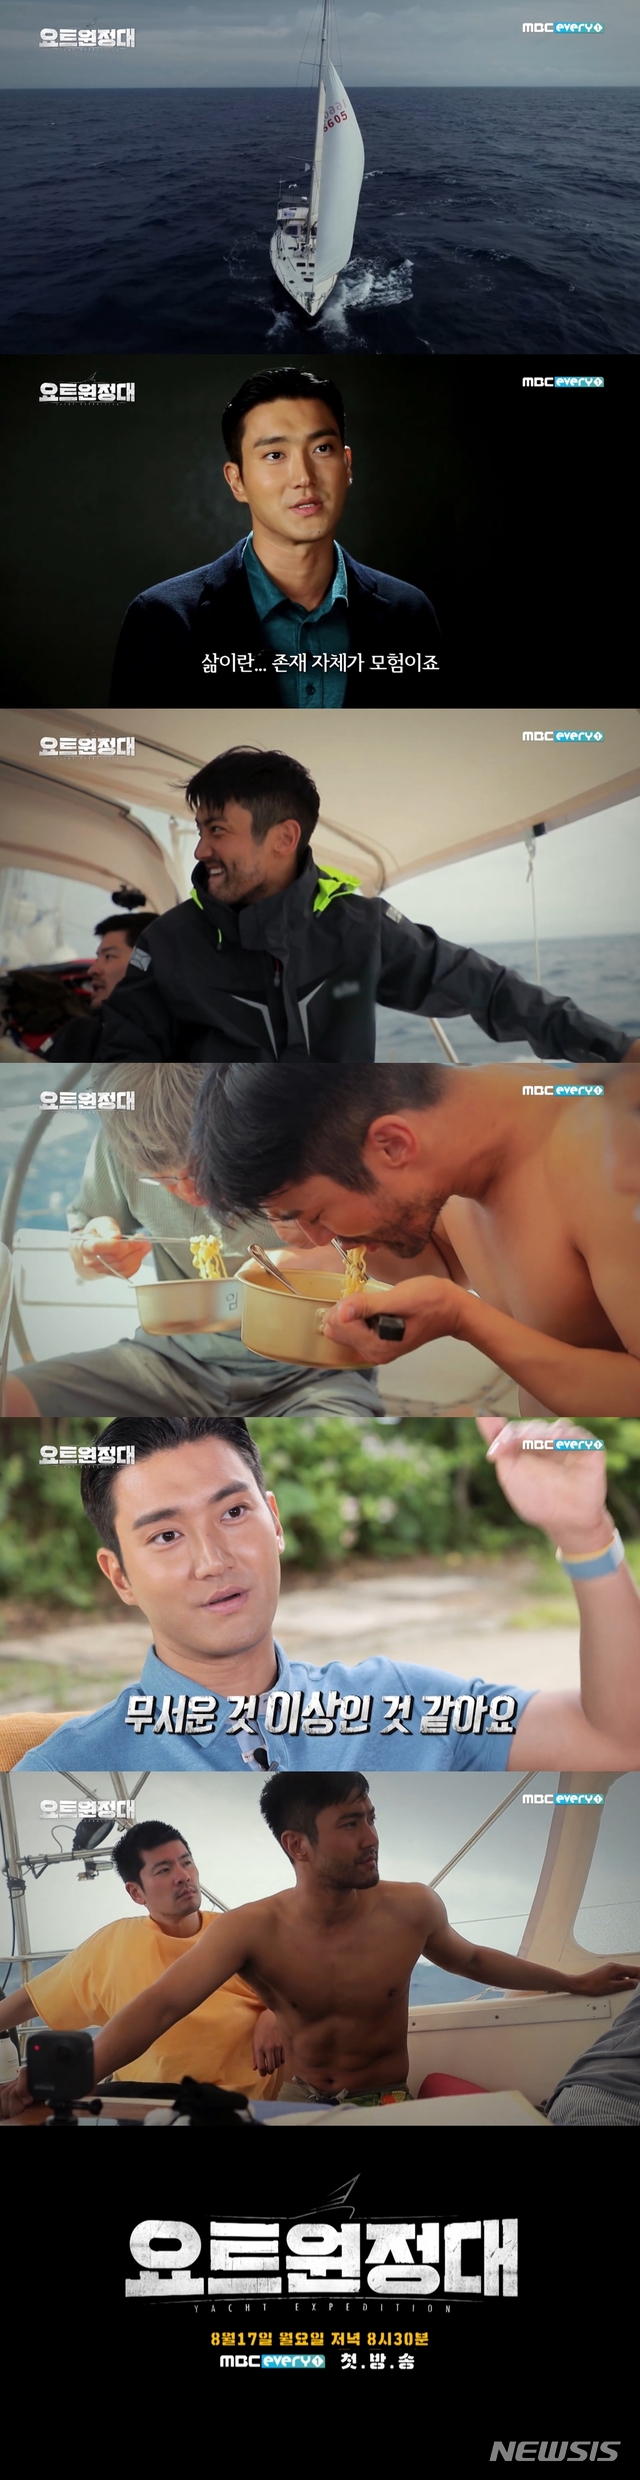 MBC Everlon yacht Expedition is a documentary entertainment program that shows the process of challenging the Pacific Ocean voyage by four men who dreamed of adventure on yacht.Captain Kim Seung-jin, who succeeded in traveling around the world alone without being the first in Korea, and four men, Jin Goo, Choi Siwon, Jang Jang Ha and Song Ho Jun, sail to Pacific Ocean.Previously, the yacht expedition side revealed the character notice Jin Goo side and attracted attention.In the character preview, Jin Goo was enthusiastic in the rising waves and the heavy rain, and made him expect a raw Earth 2.In the meantime, the second character preview of the yacht expedition was released.Yacht Expedition Character Prediction Choi Siwon begins with a voice of We will not be easy to sail by Choi Siwon, who is shaking up a yacht, above it.Then, Choi Siwon, who is sailing on the actual yacht, is revealed without hesitation.Choi Siwon was motion sick on a shaking yacht, or even slapped with water because of unstoppable waves.In addition, Choi Siwon, who grew up with a beard, takes a picture of ramen on the yacht while taking off his top, falling and falling in a shaking wave.Choi Siwon, who was excited that life is an adventure itself, said, I think it is more than scary. The yacht expedition  crew was also confident of the second real Earth, which was not seen in any entertainment ever.It will be broadcast first at 8:30 p.m. on the 17th.